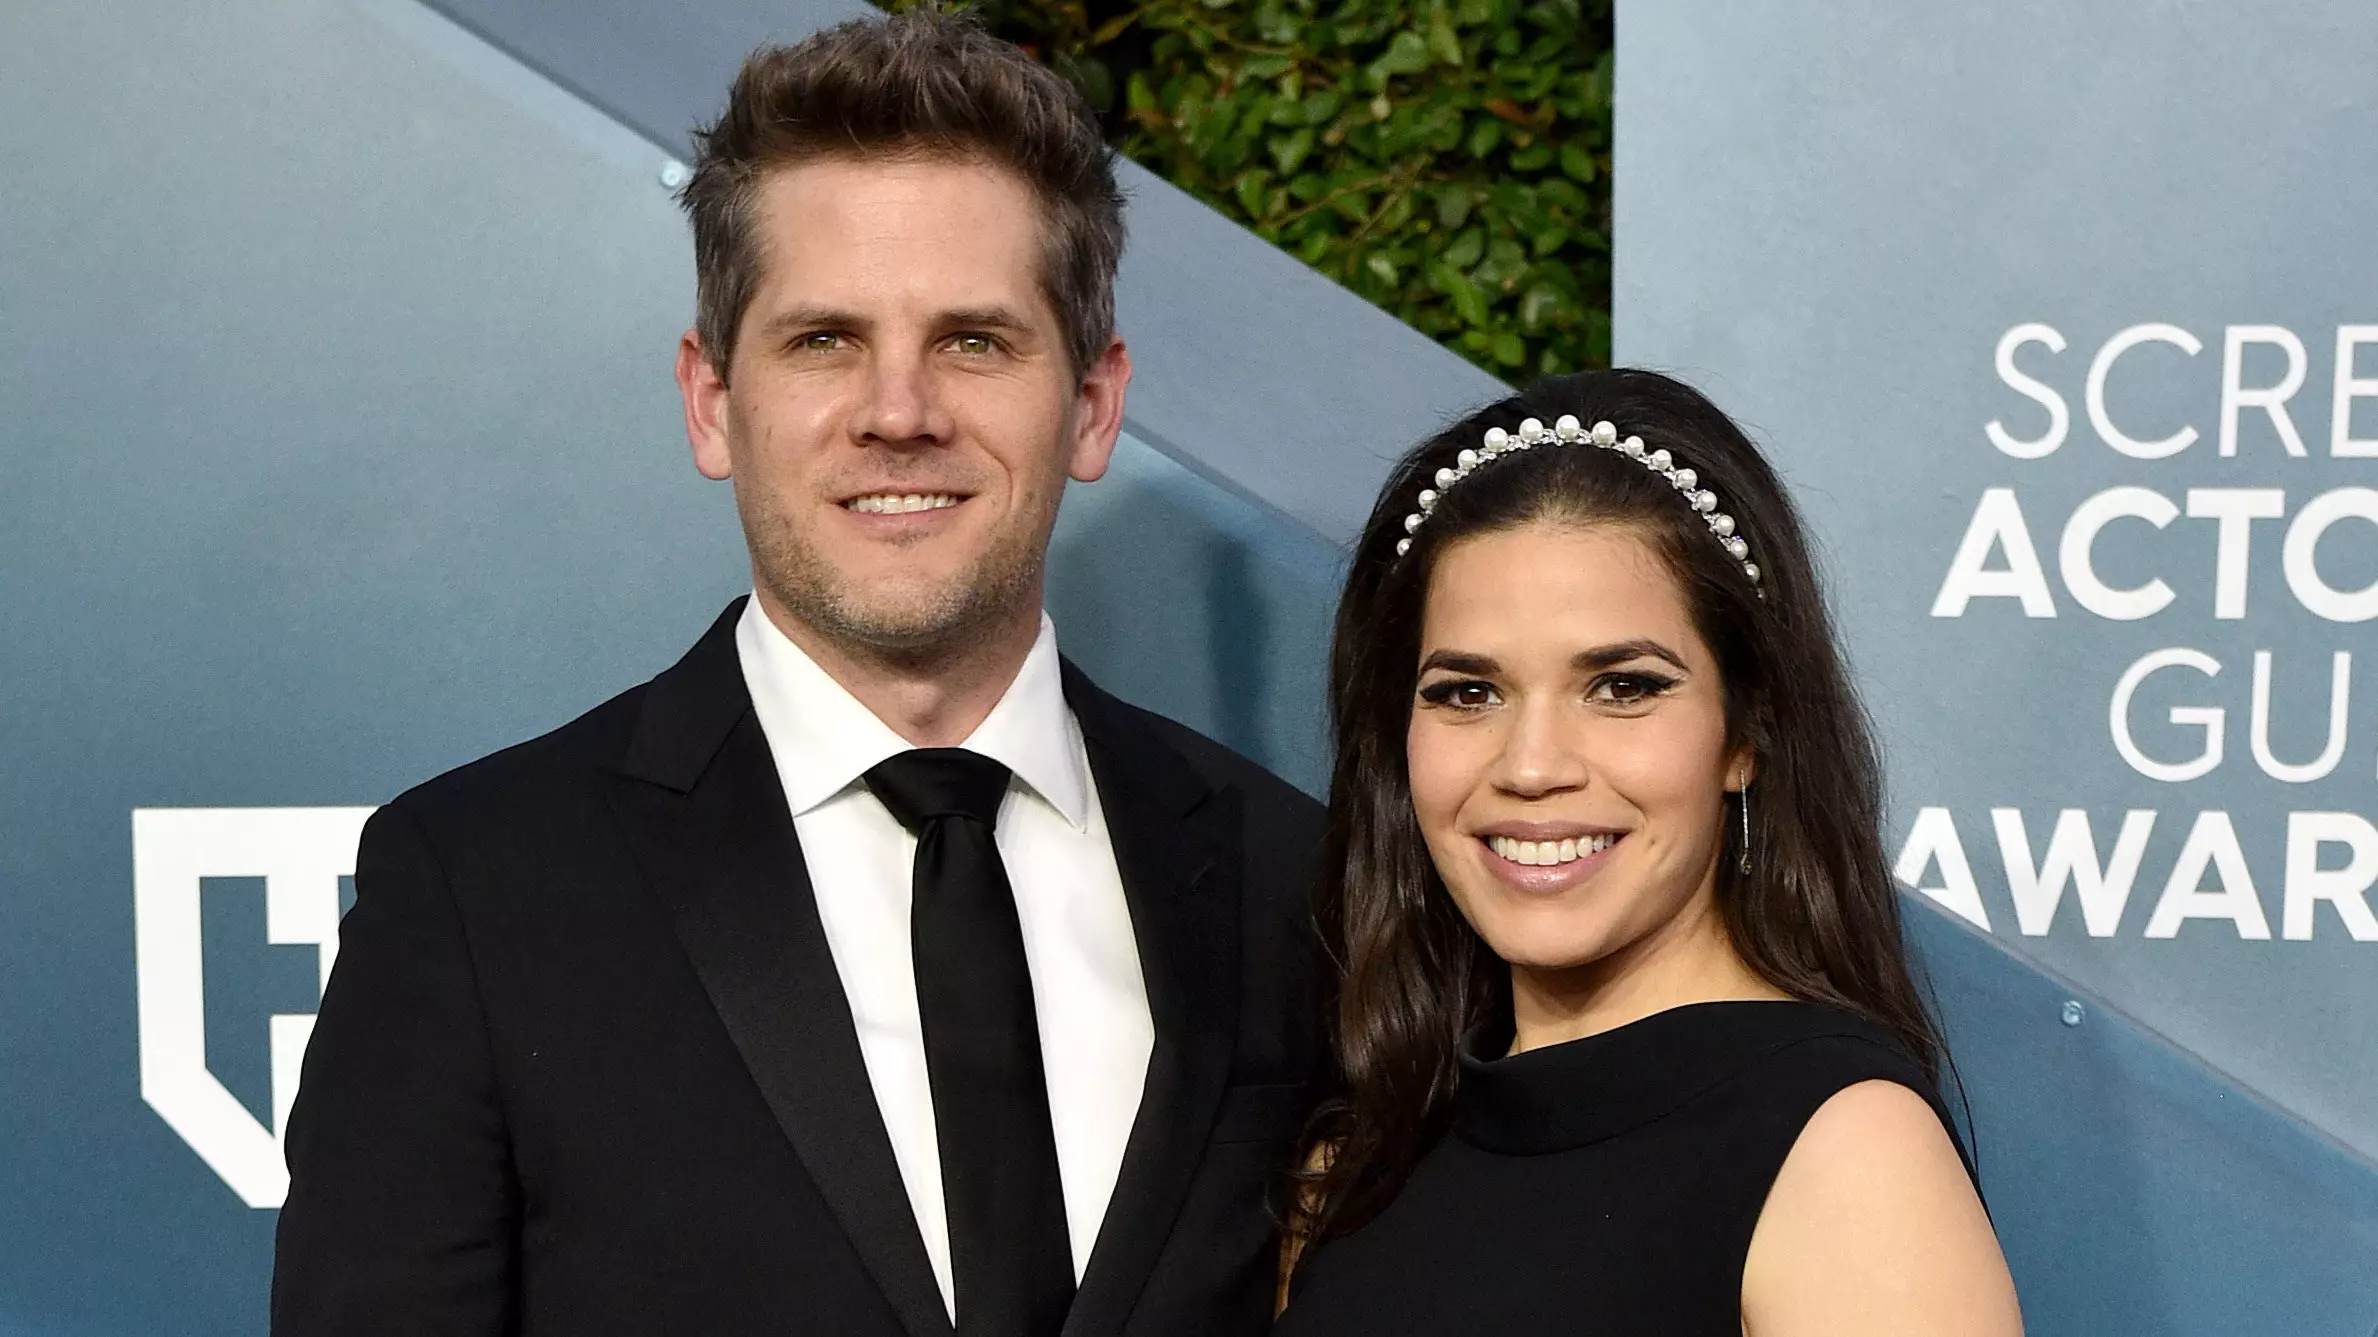 'Ugly Betty' Star America Ferrera Gives Birth To Little Girl And Reveals Adorable Name